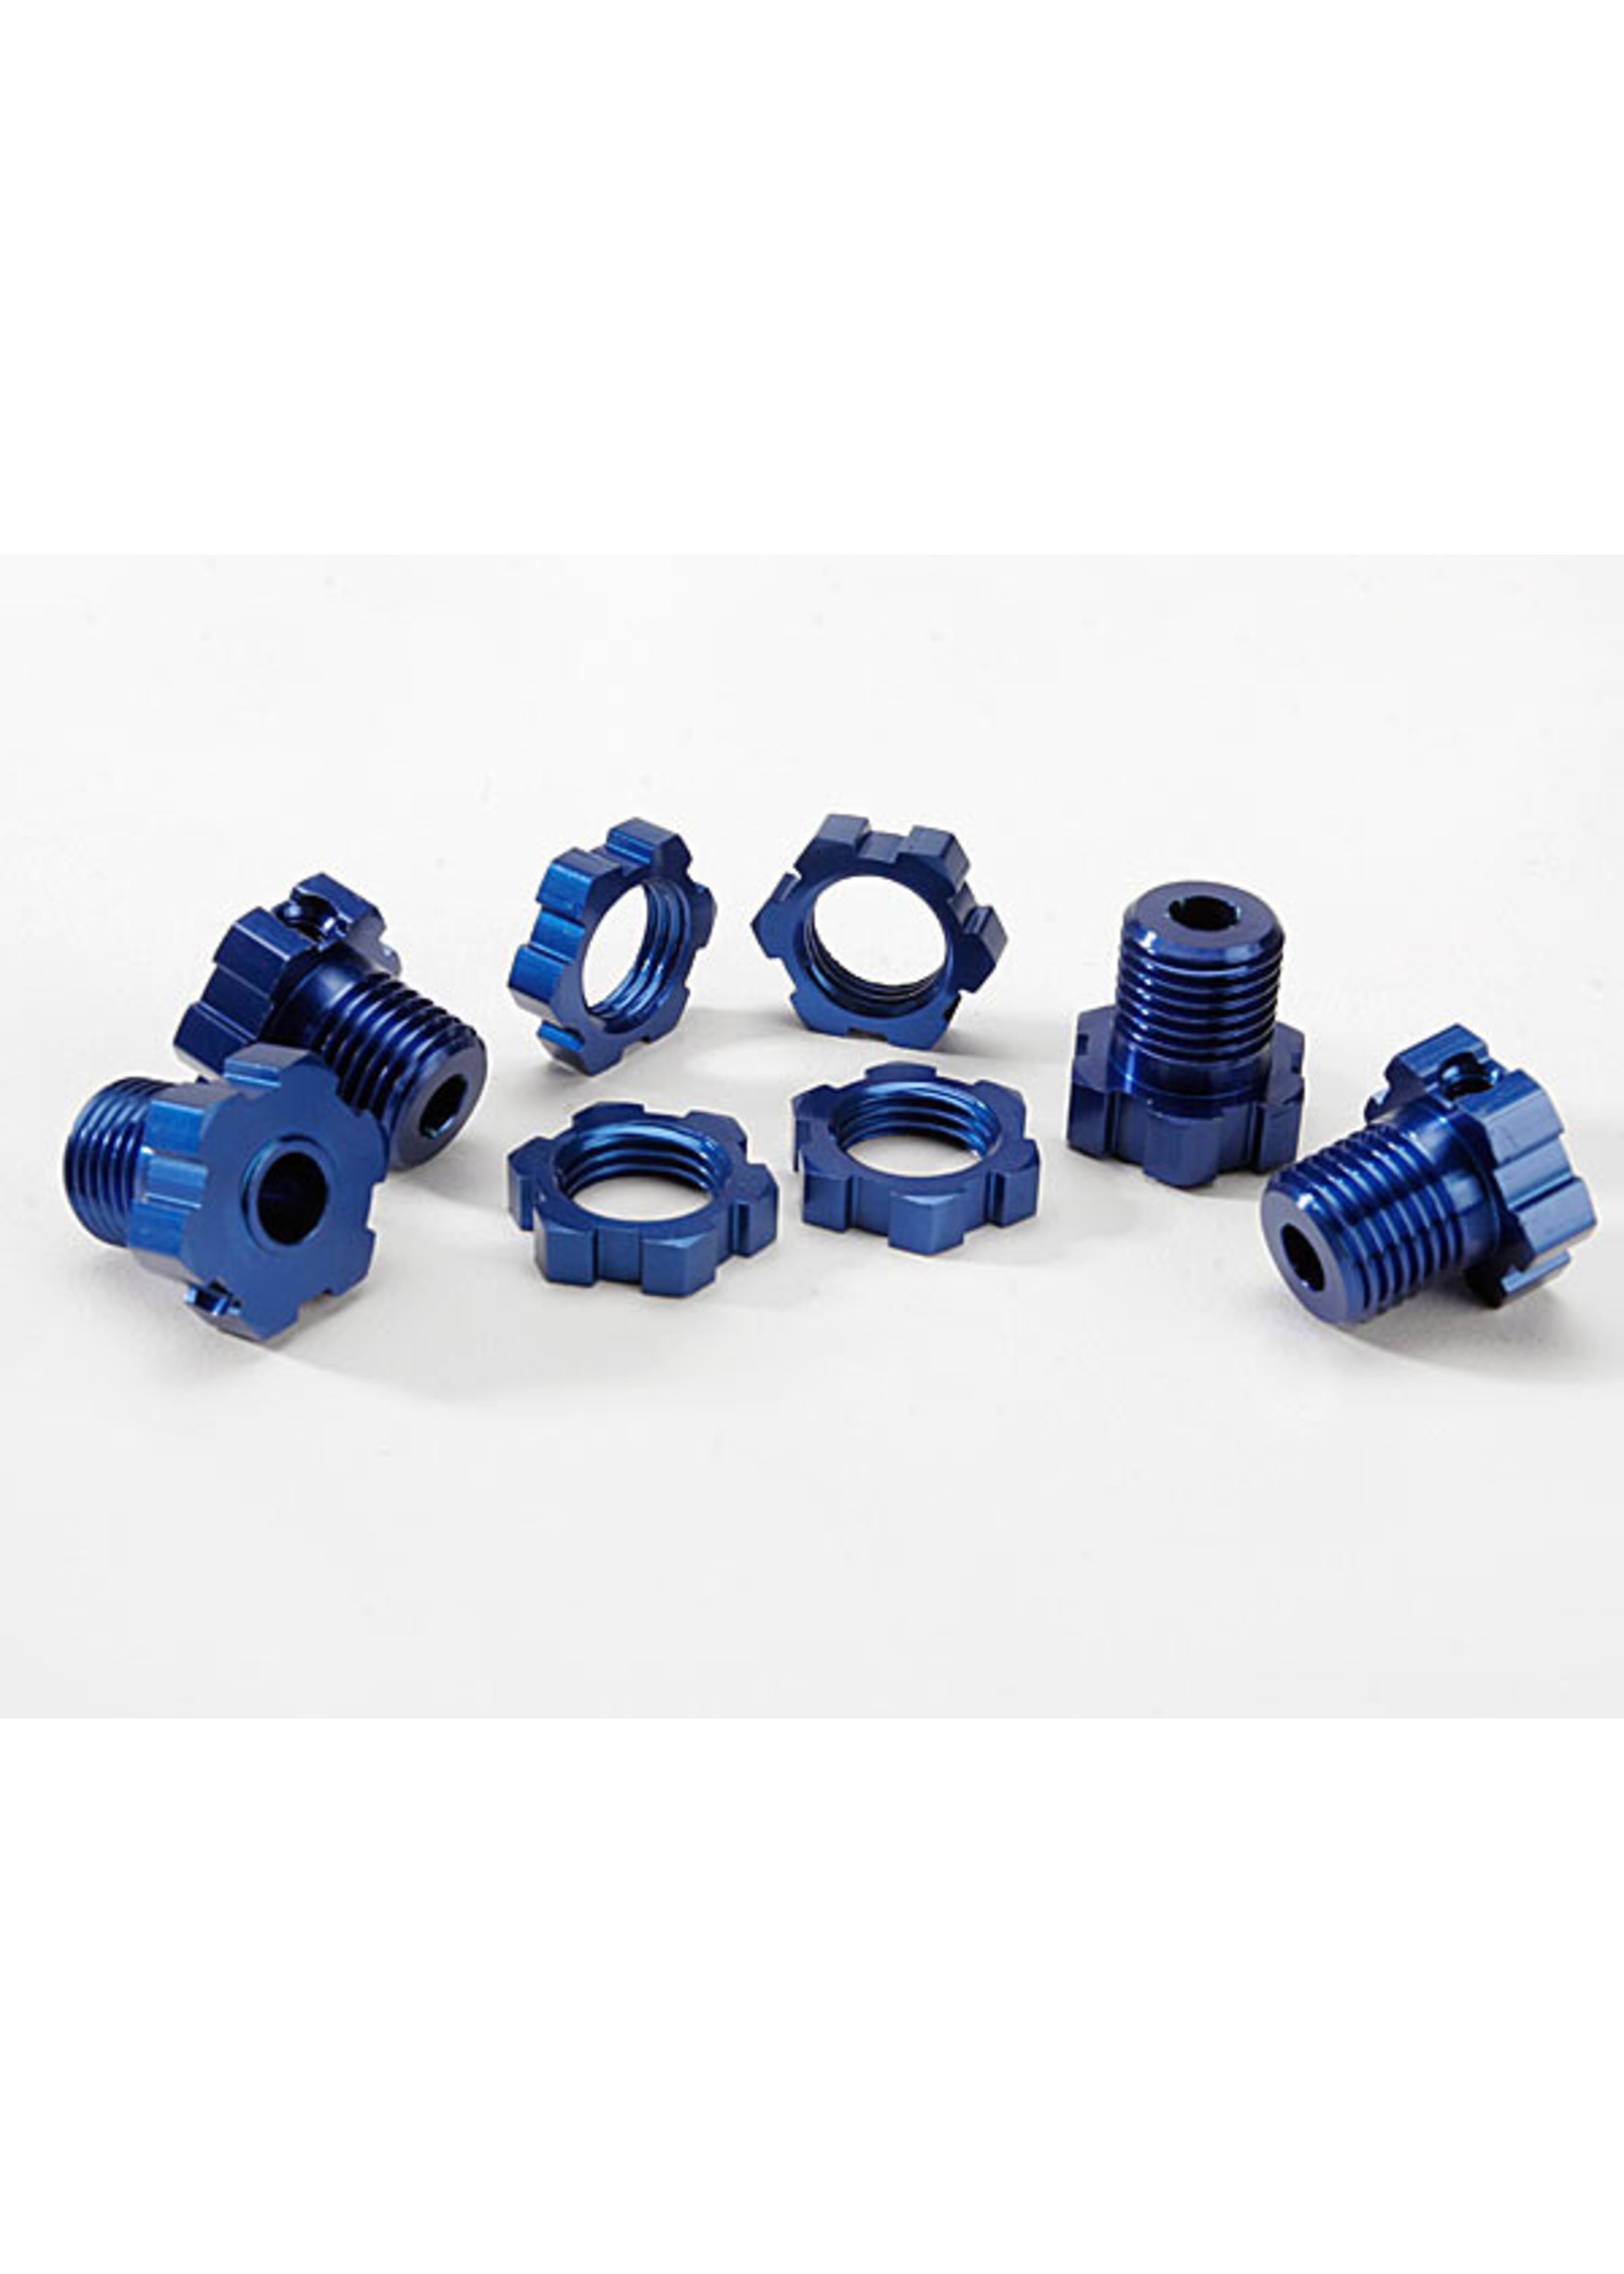 Traxxas 5353X - Anodized Wheel Hubs with Hex Kit 17mm - Blue